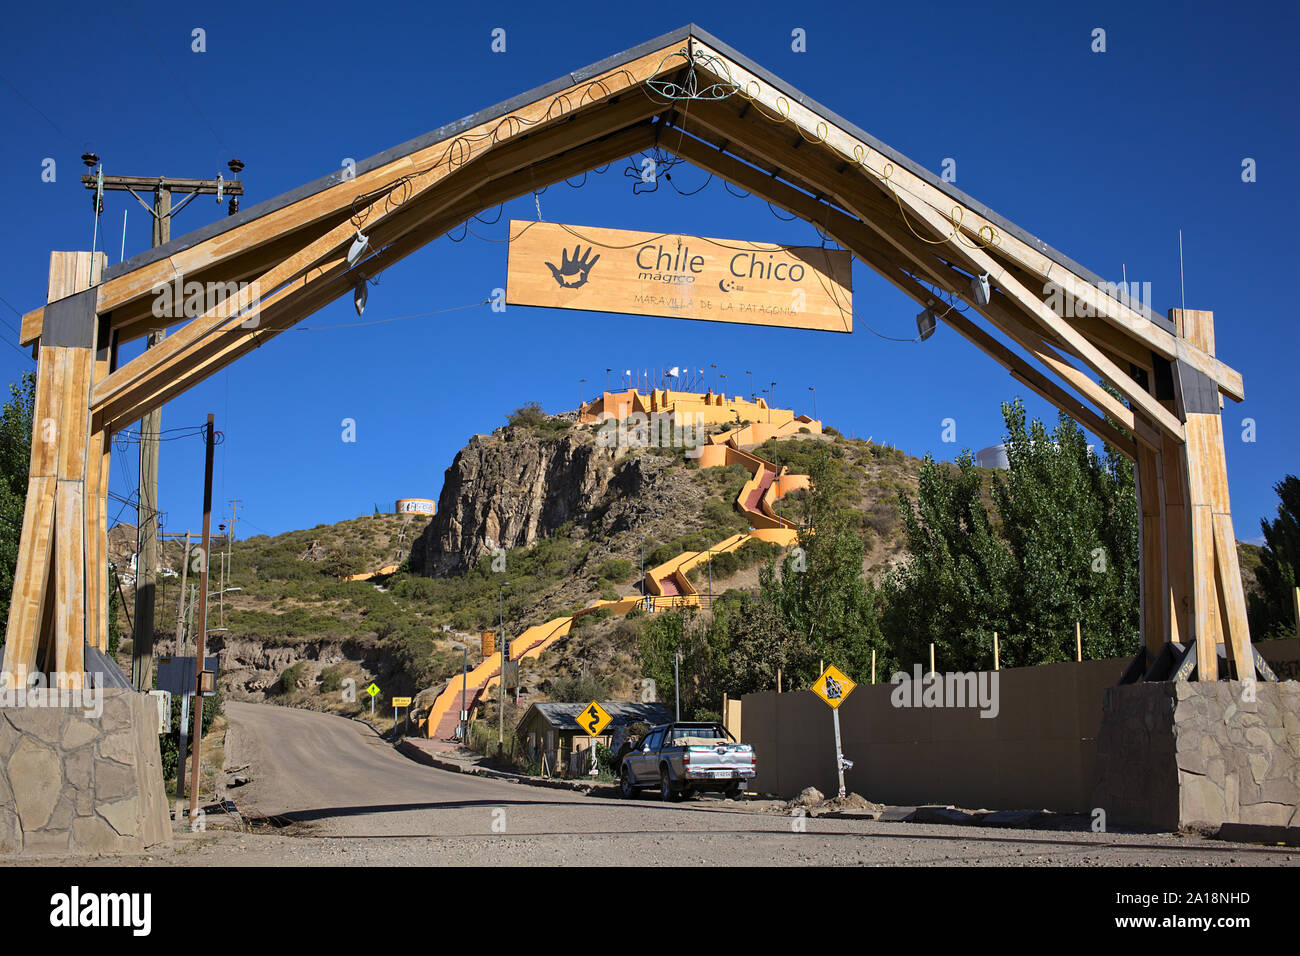 CHILE CHICO, CHILE - FEBRUARY 21, 2016: Wooden arch on O'Higgins Street with view onto the Plaza del Viento lookout in Chile Chico, Chile on February Stock Photo